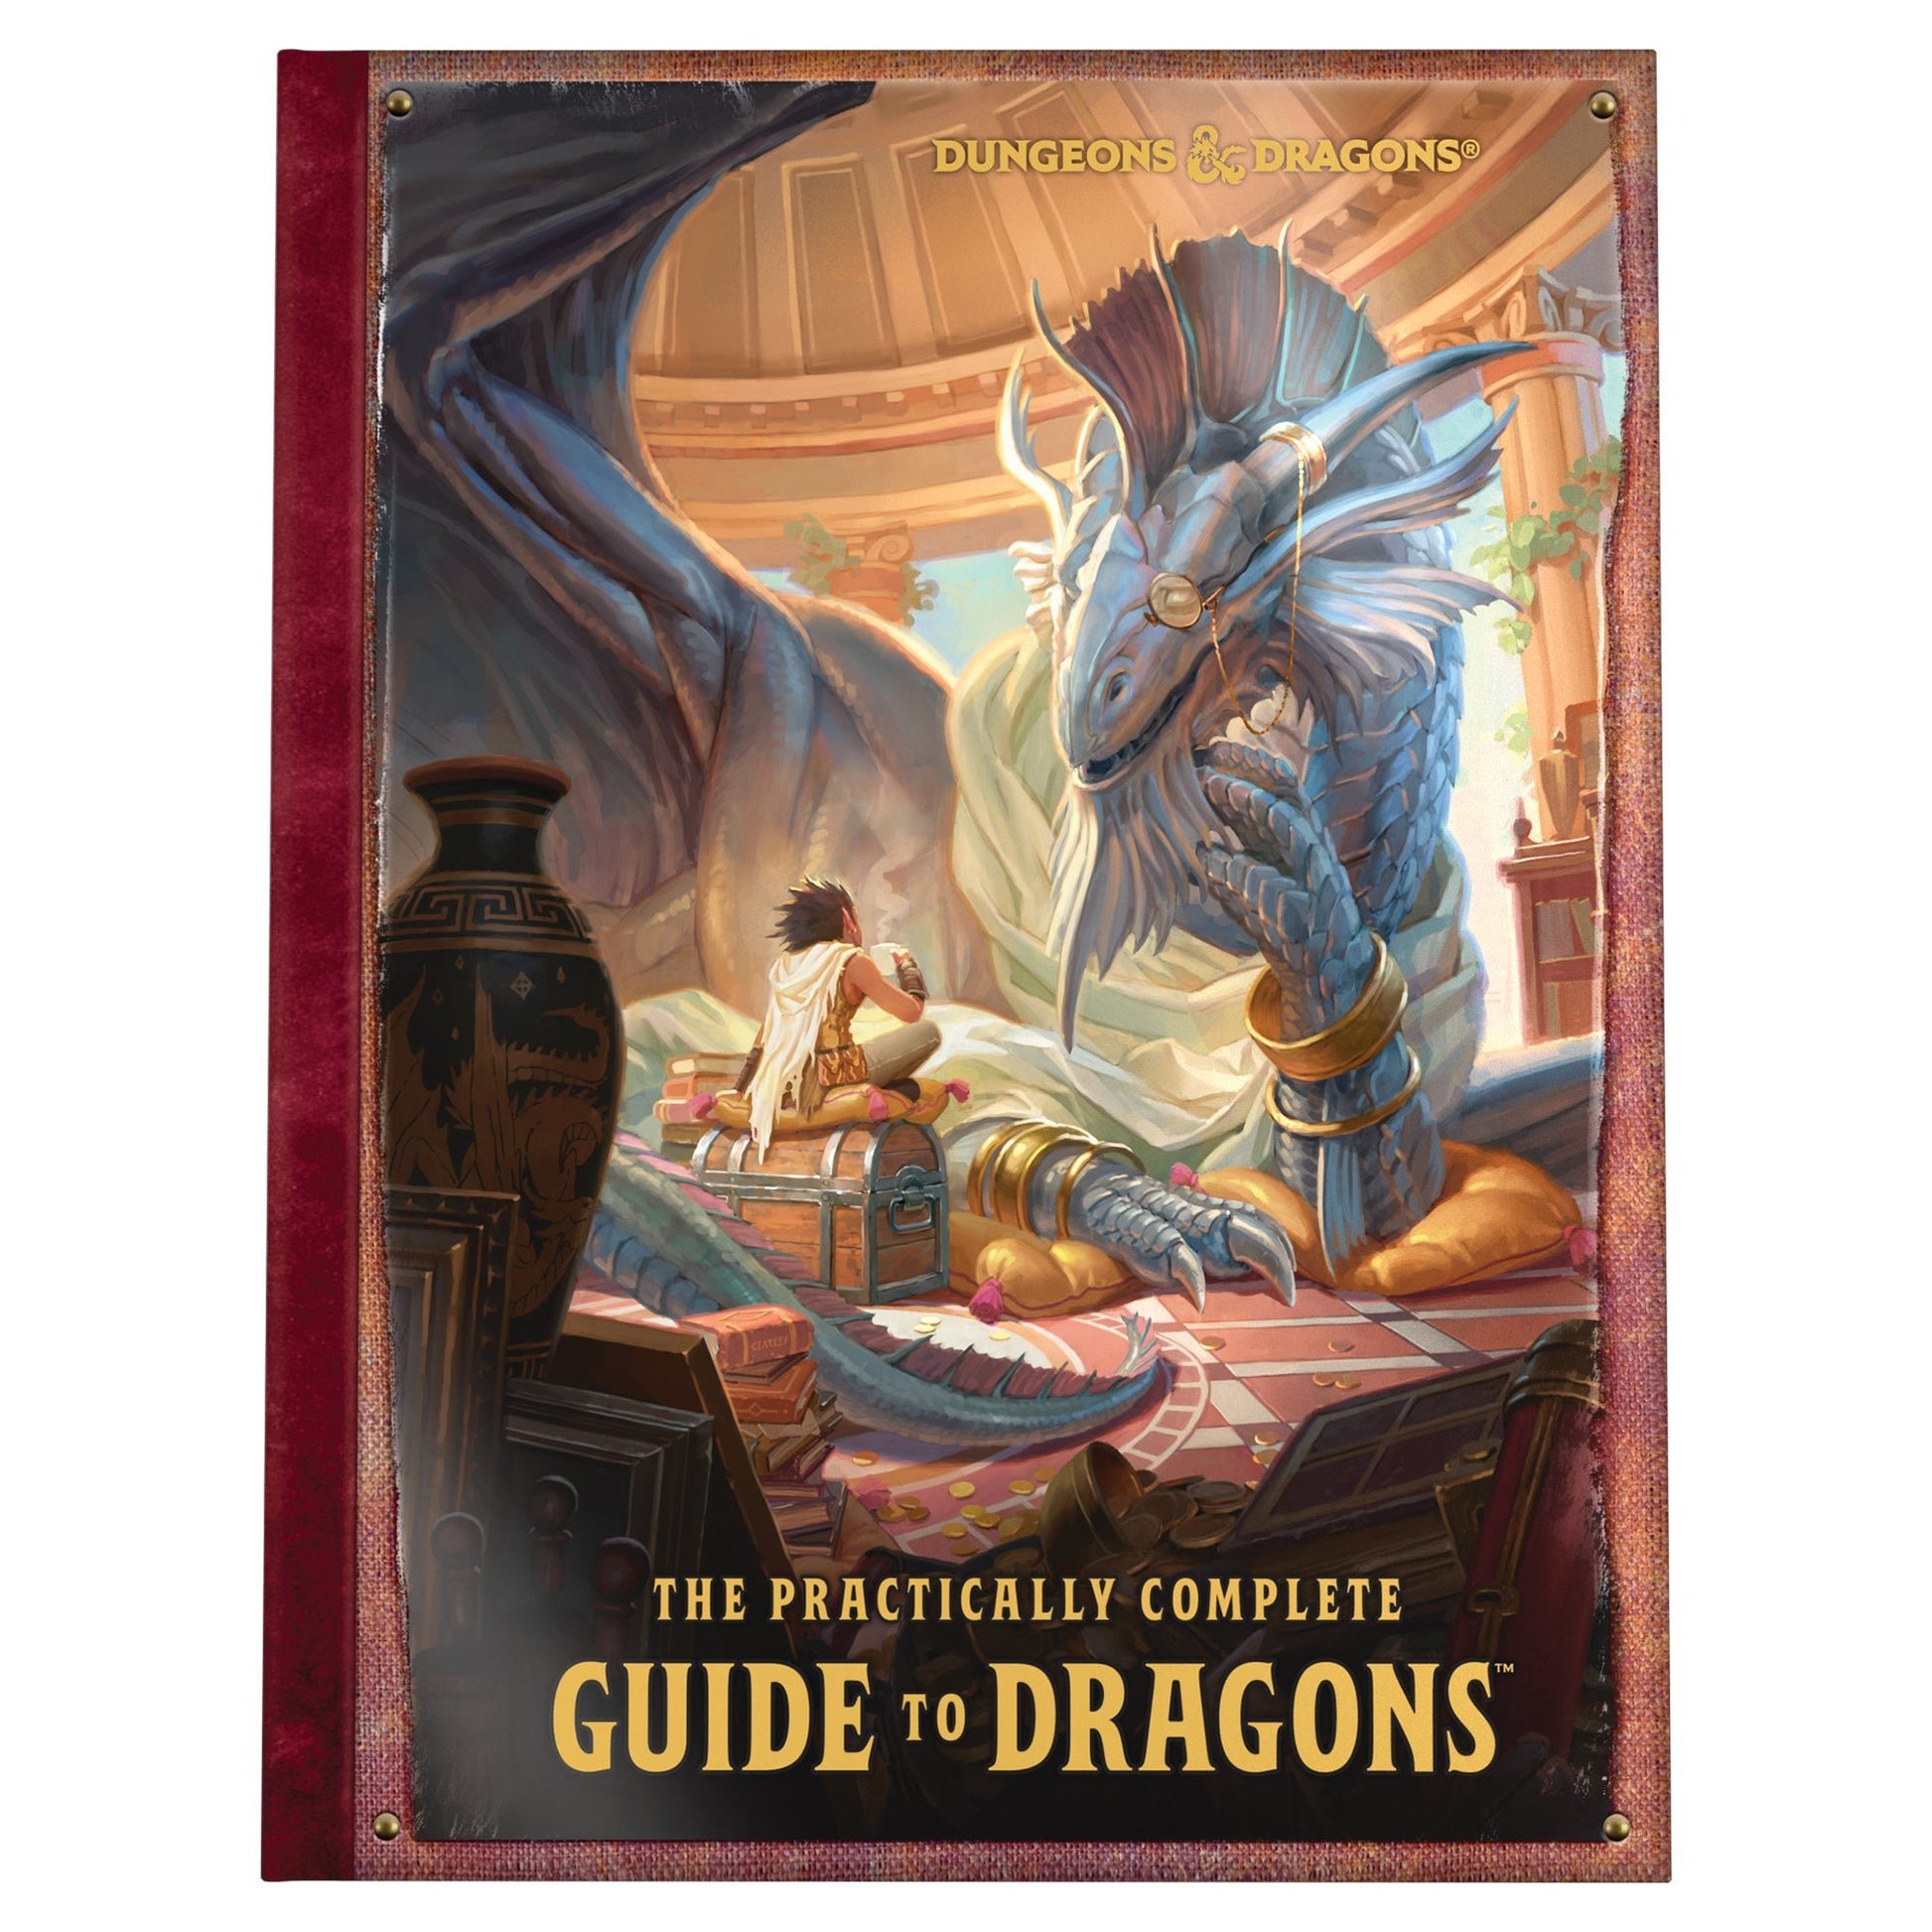 Dungeons & Dragons RPG: Practically Complete Guide to Dragons Hard Cover (Preorder) - The Compleat Strategist